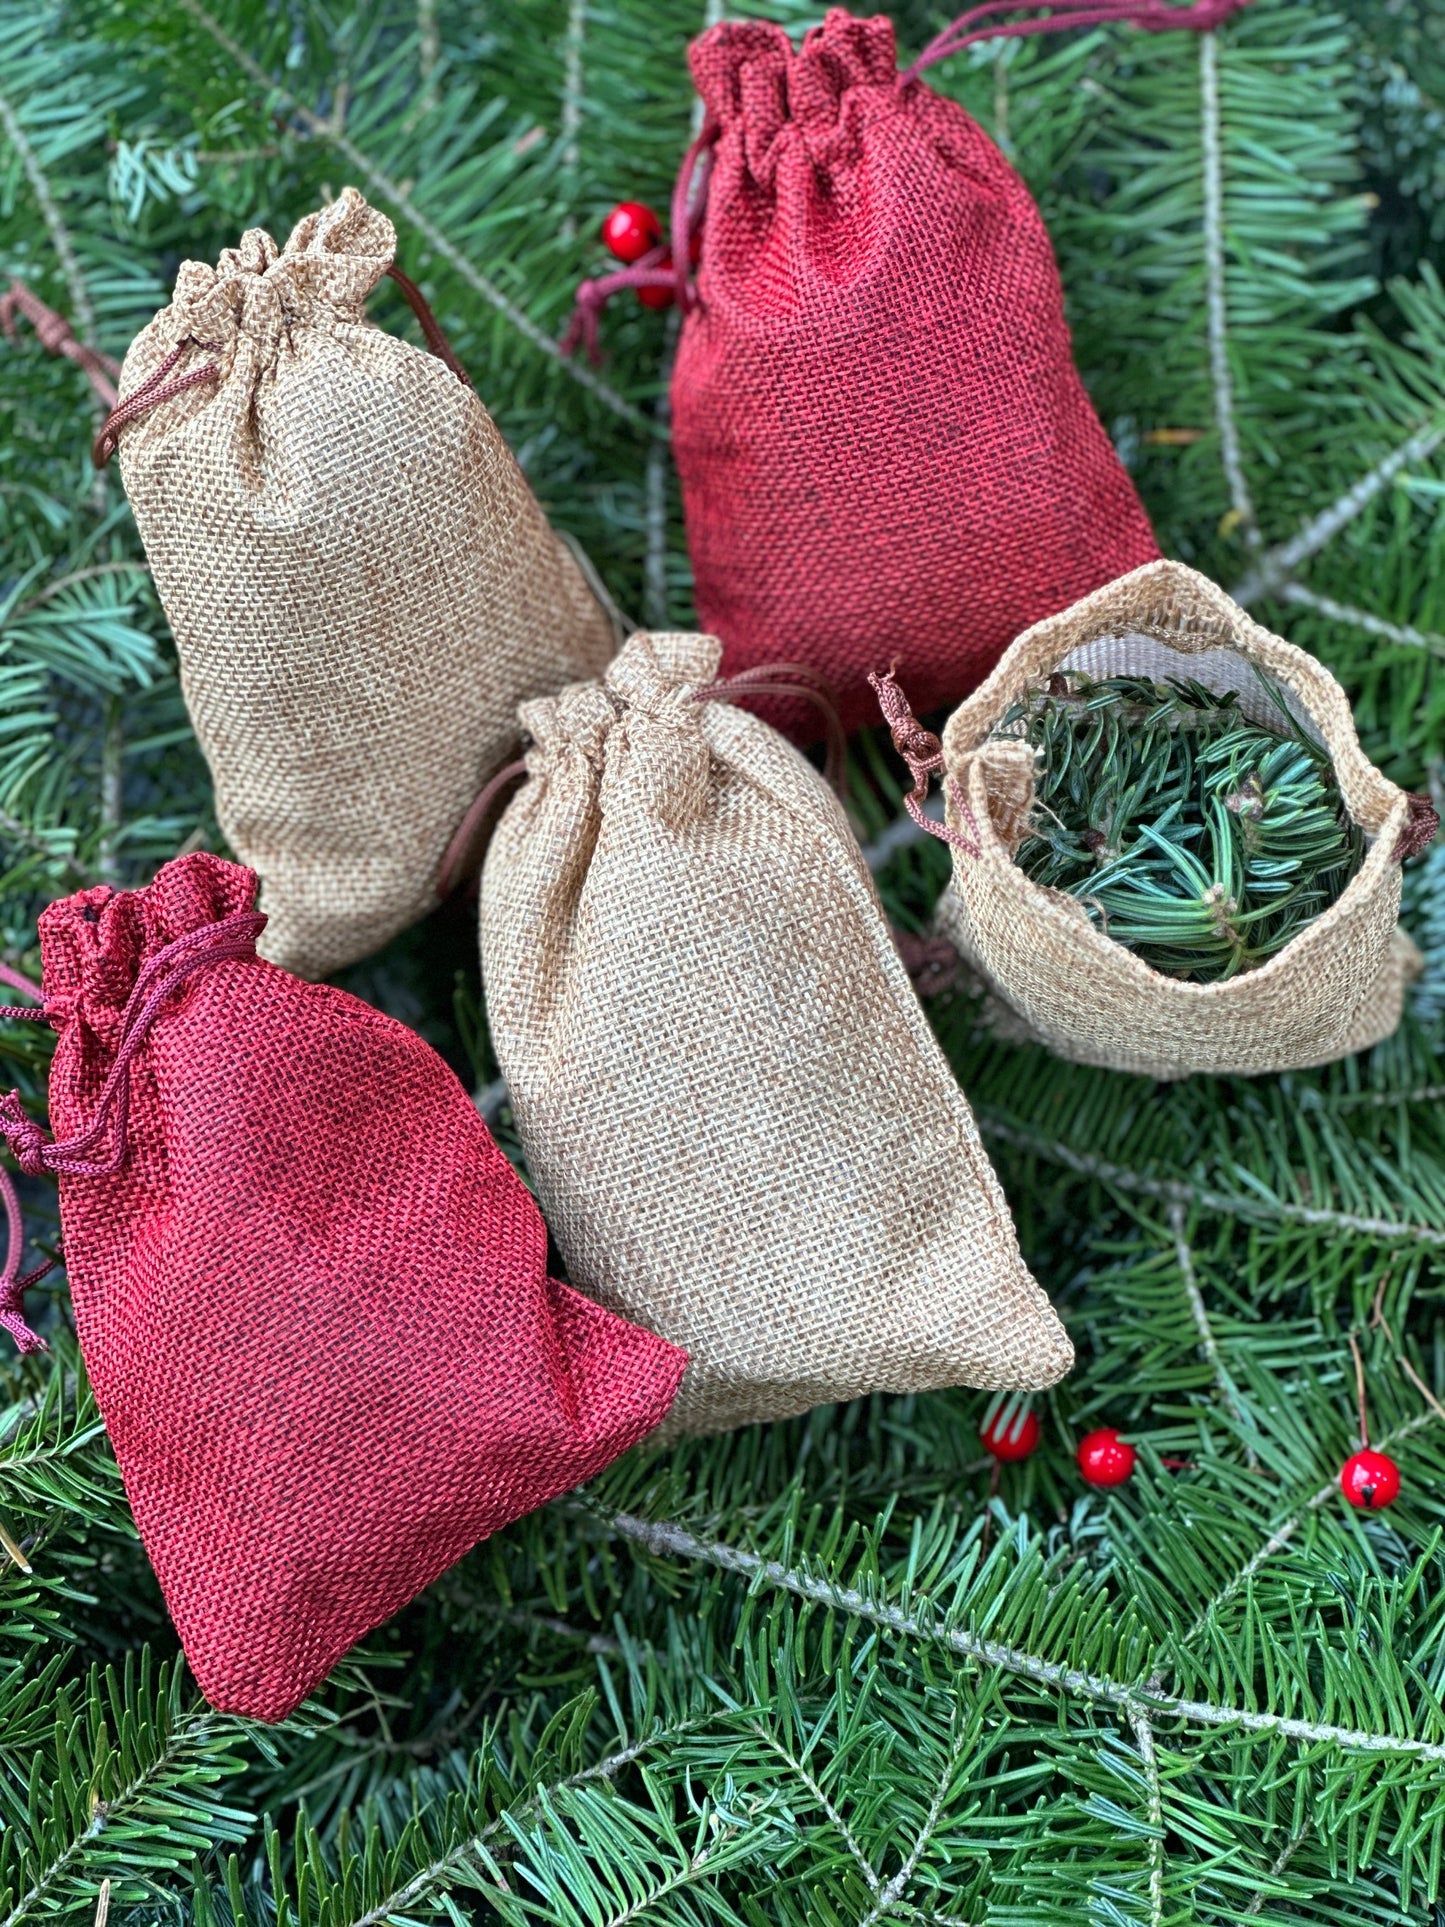 Burlap and Red Balsam Needle Bags